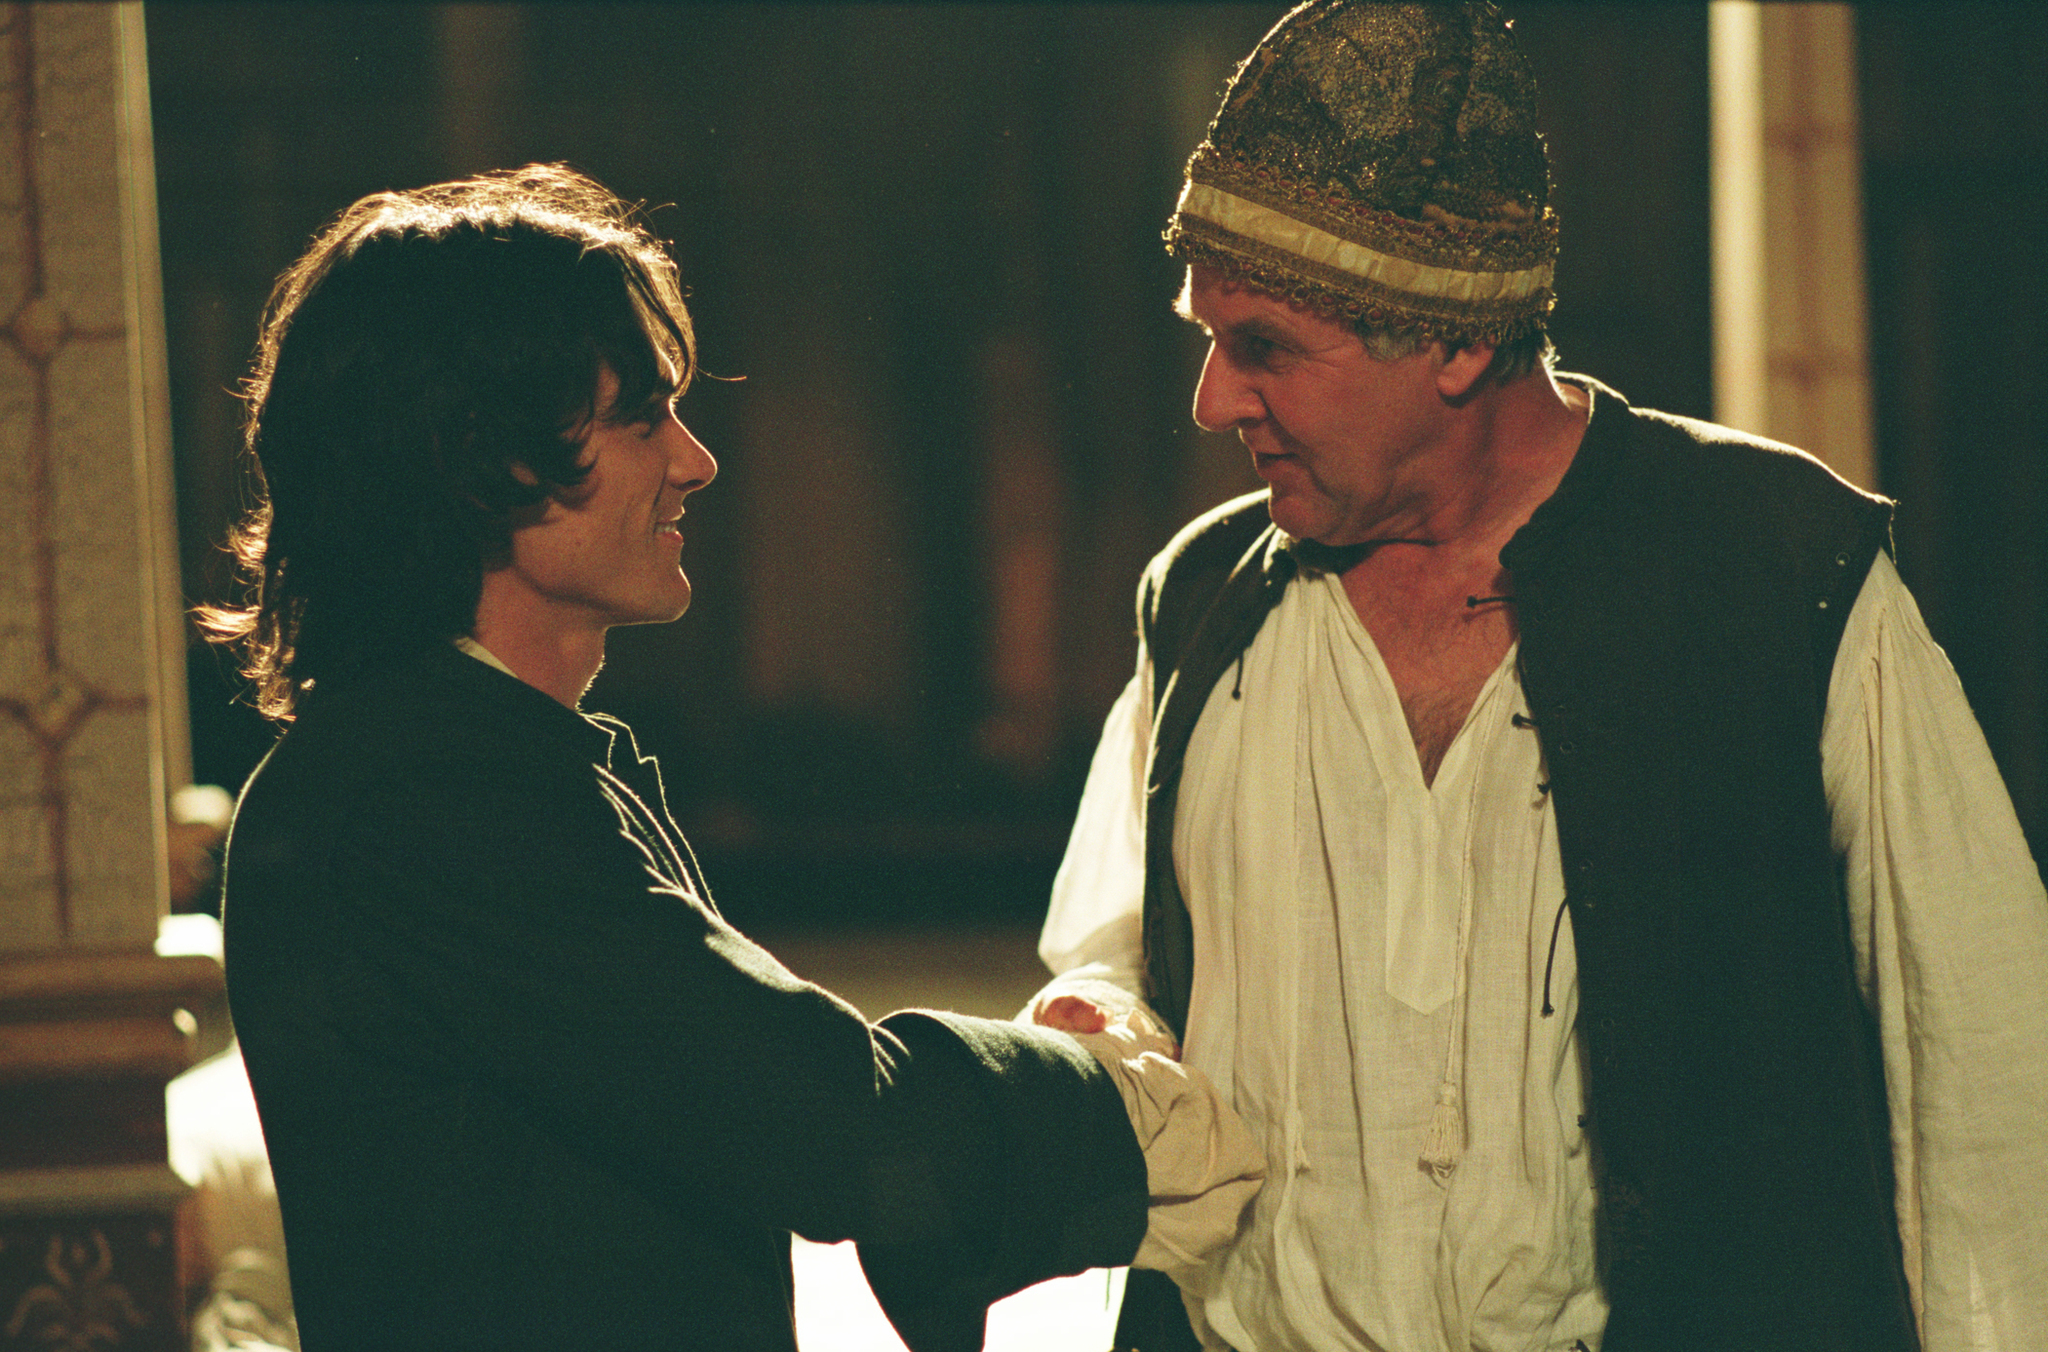 Still of Billy Crudup and Tom Wilkinson in Stage Beauty (2004)